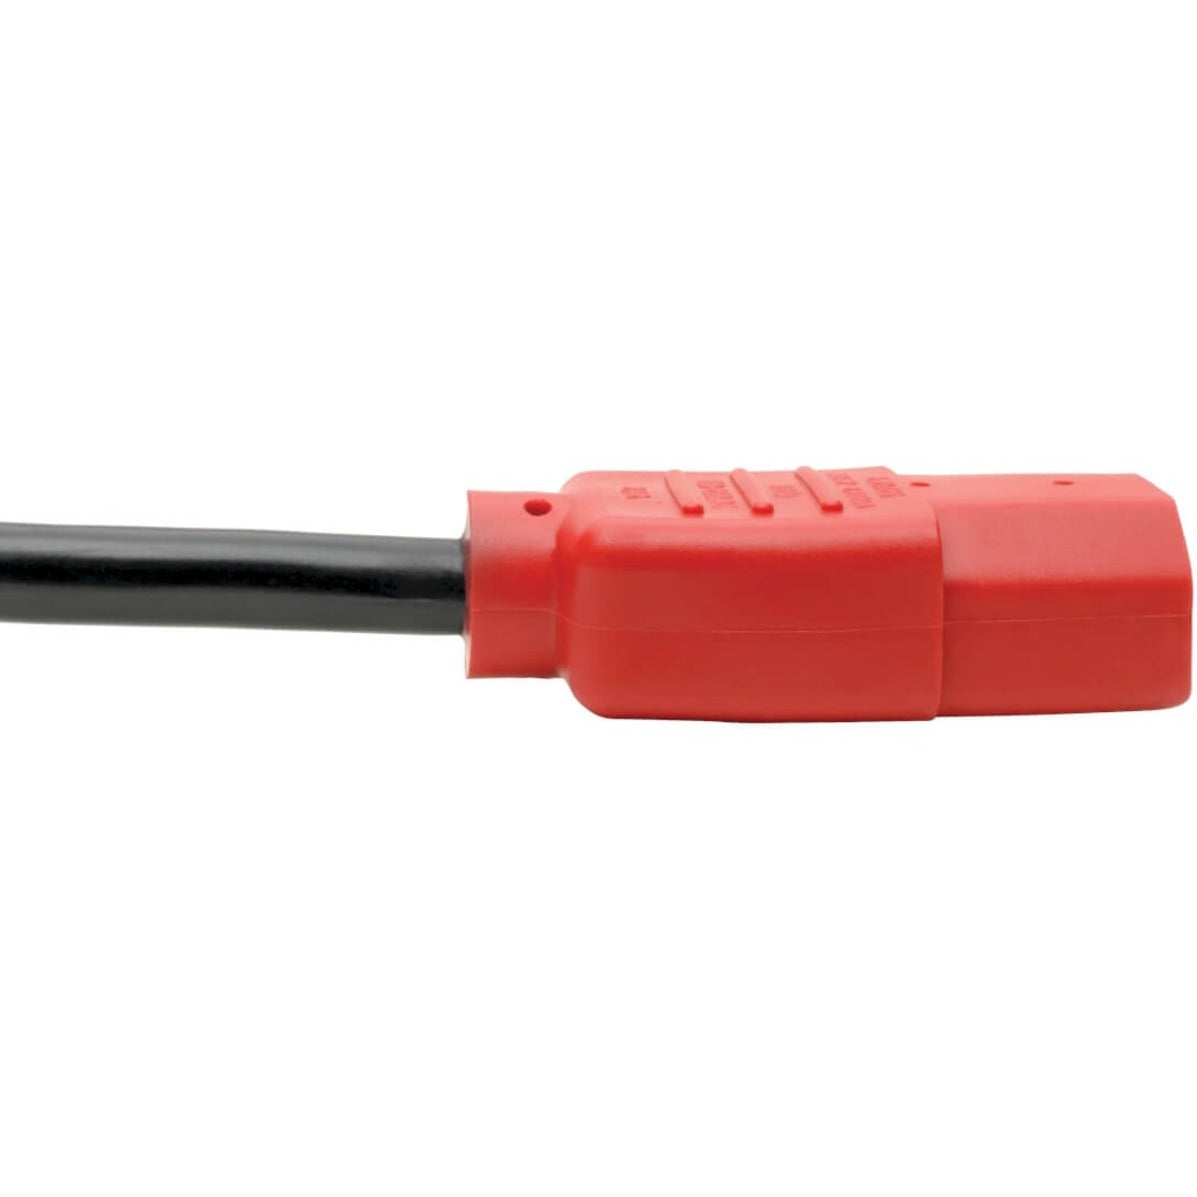 Tripp Lite P004-004-RD Power Interconnect Cord, 4 ft, Red